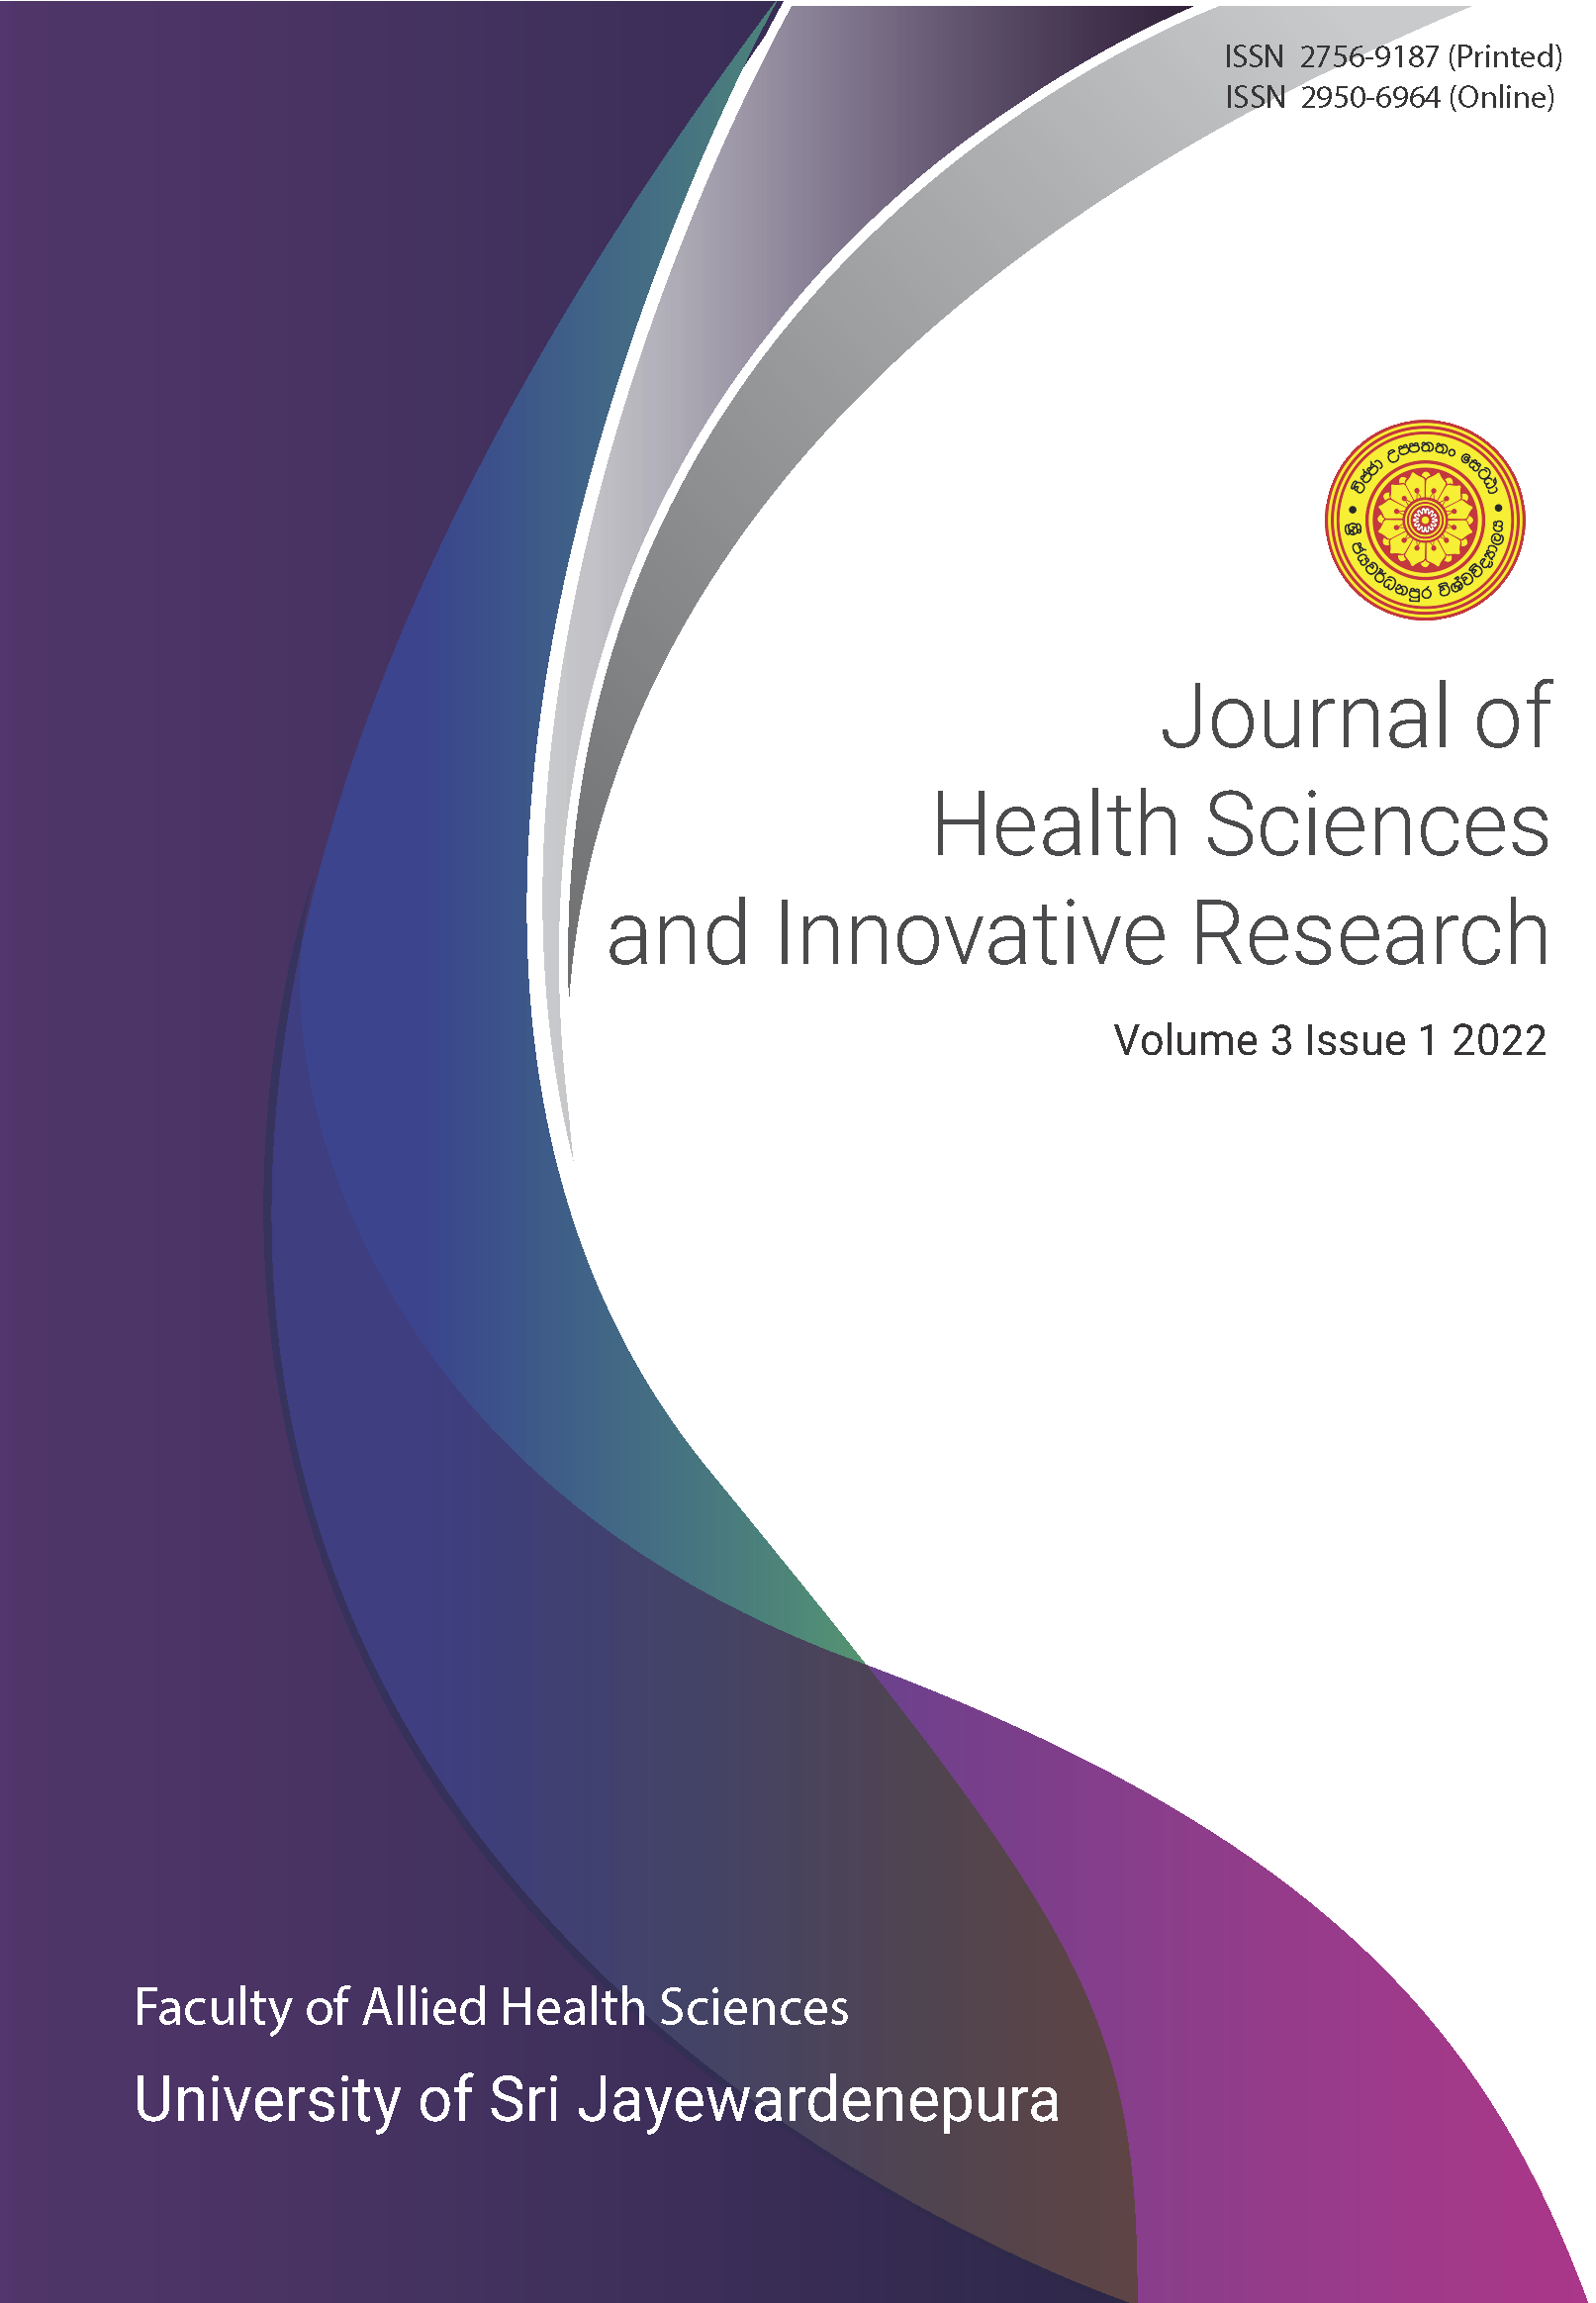 					View Vol. 3 No. 01 (2022):  Journal of Health Sciences and Innovative Research
				